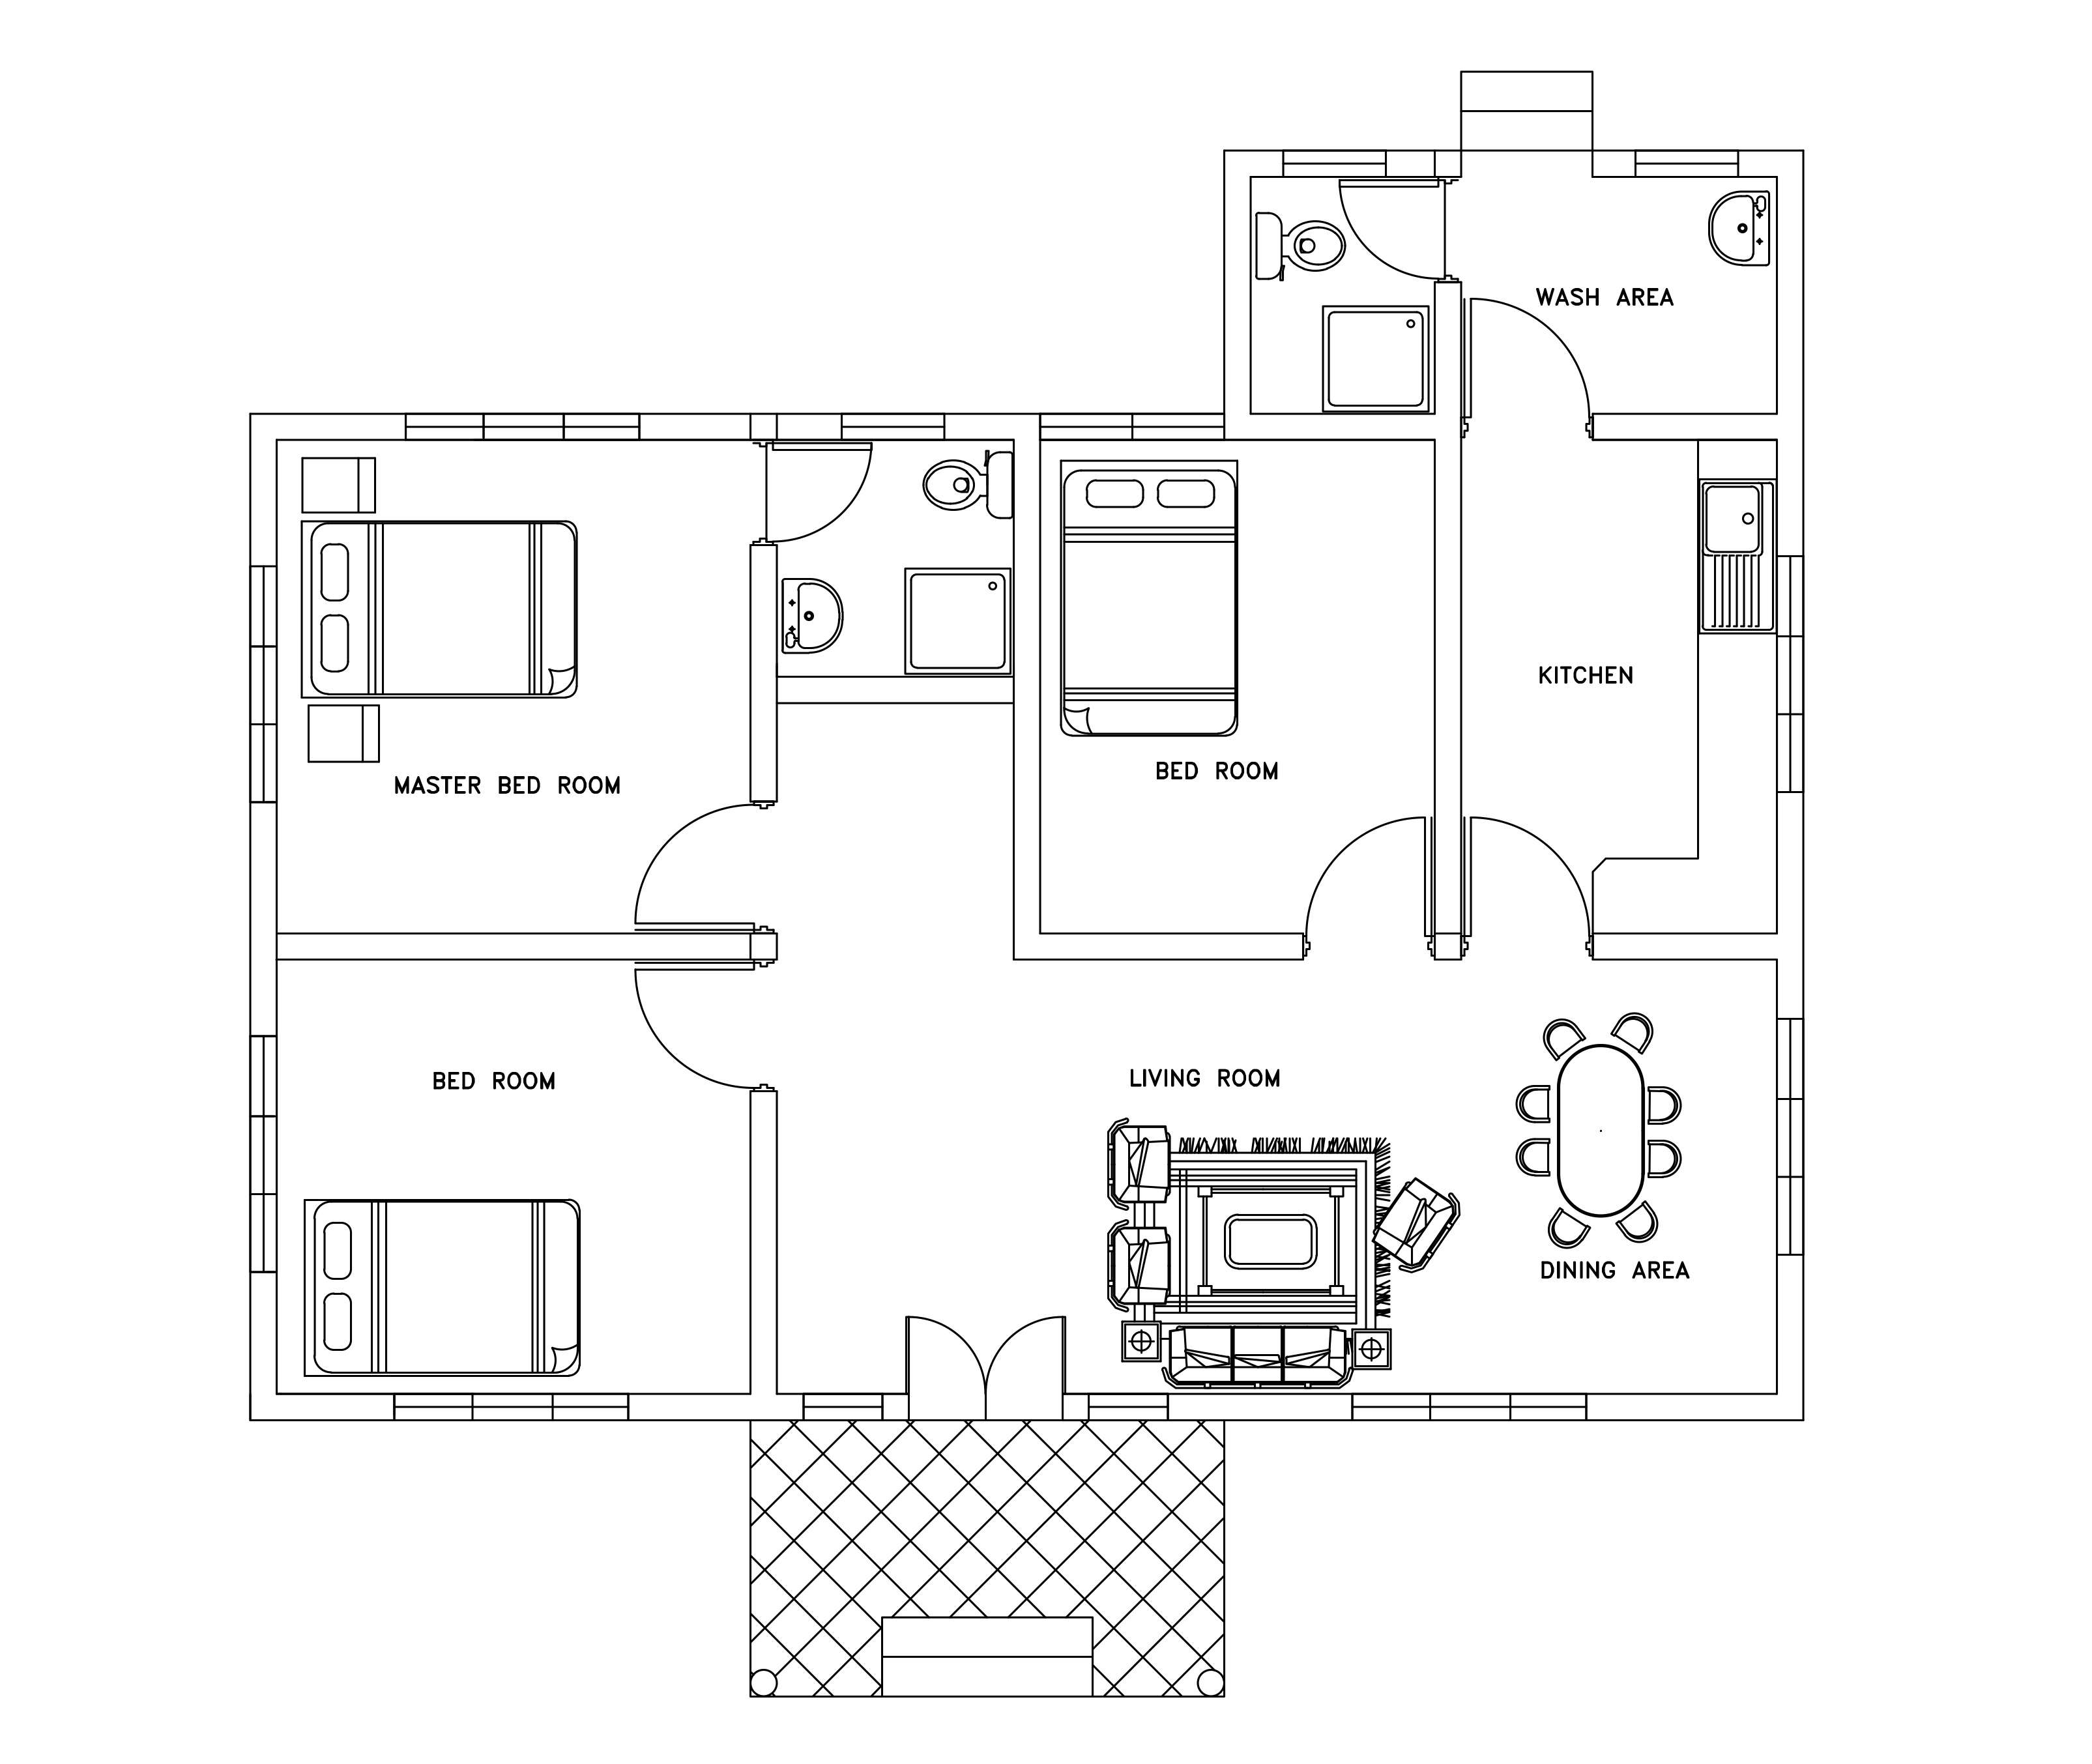 http://www.dwgnet.com/wp-content/uploads/2016/09/Single-story-three-bed-room-small-house-plan-free-download-with-dwg-cad-file-from-dwgnet-website.jpg